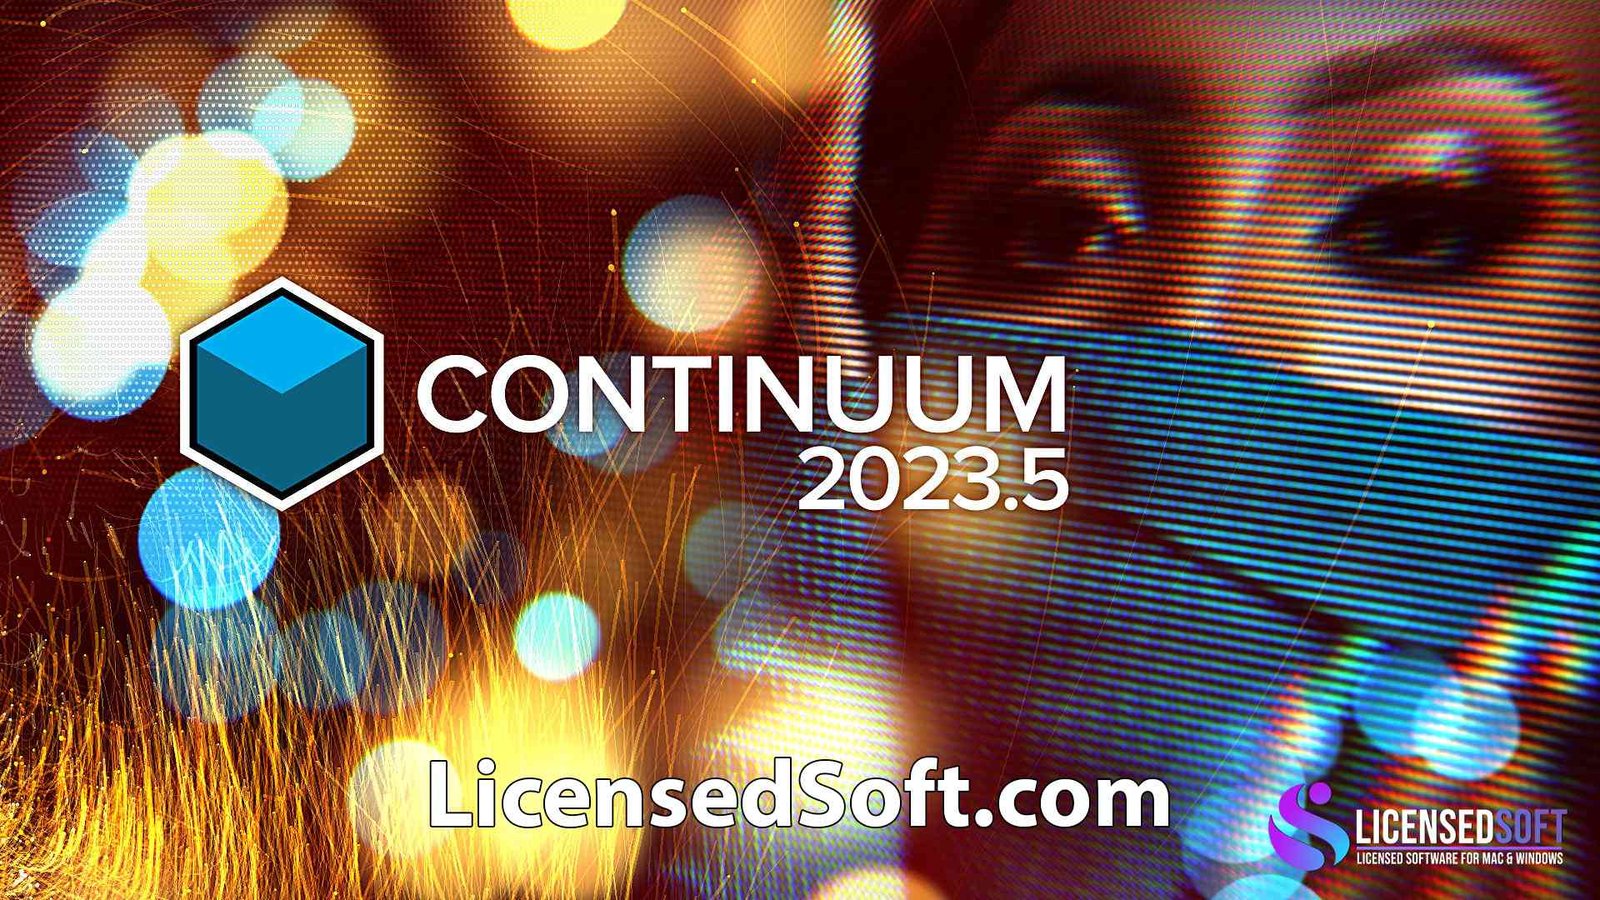 Boris FX Continuum Complete 2023 for Adobe Cover Image By LicensedSoft